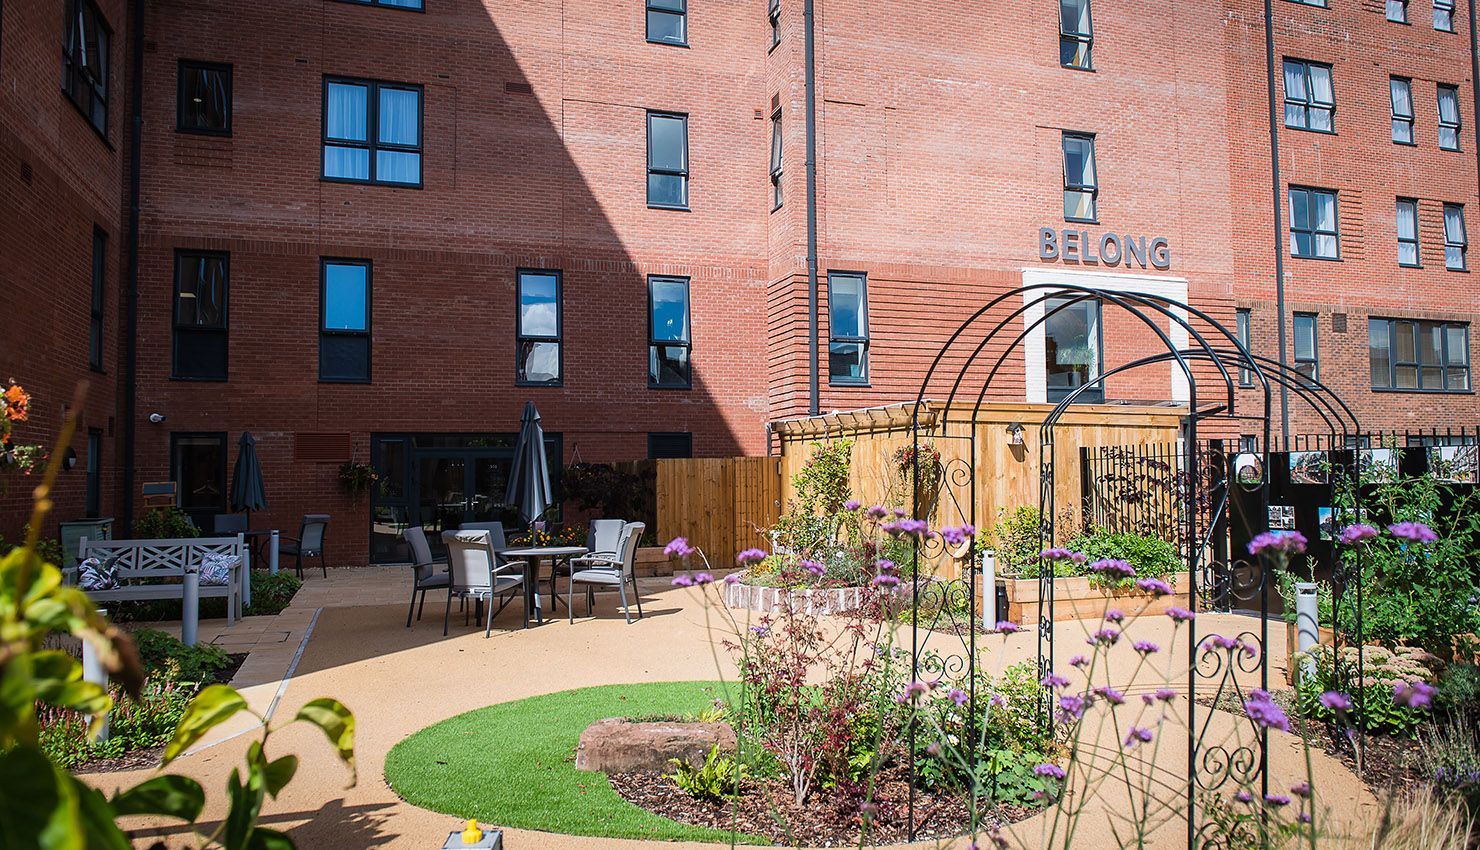 Belong Chester - Outdoor space and gardens